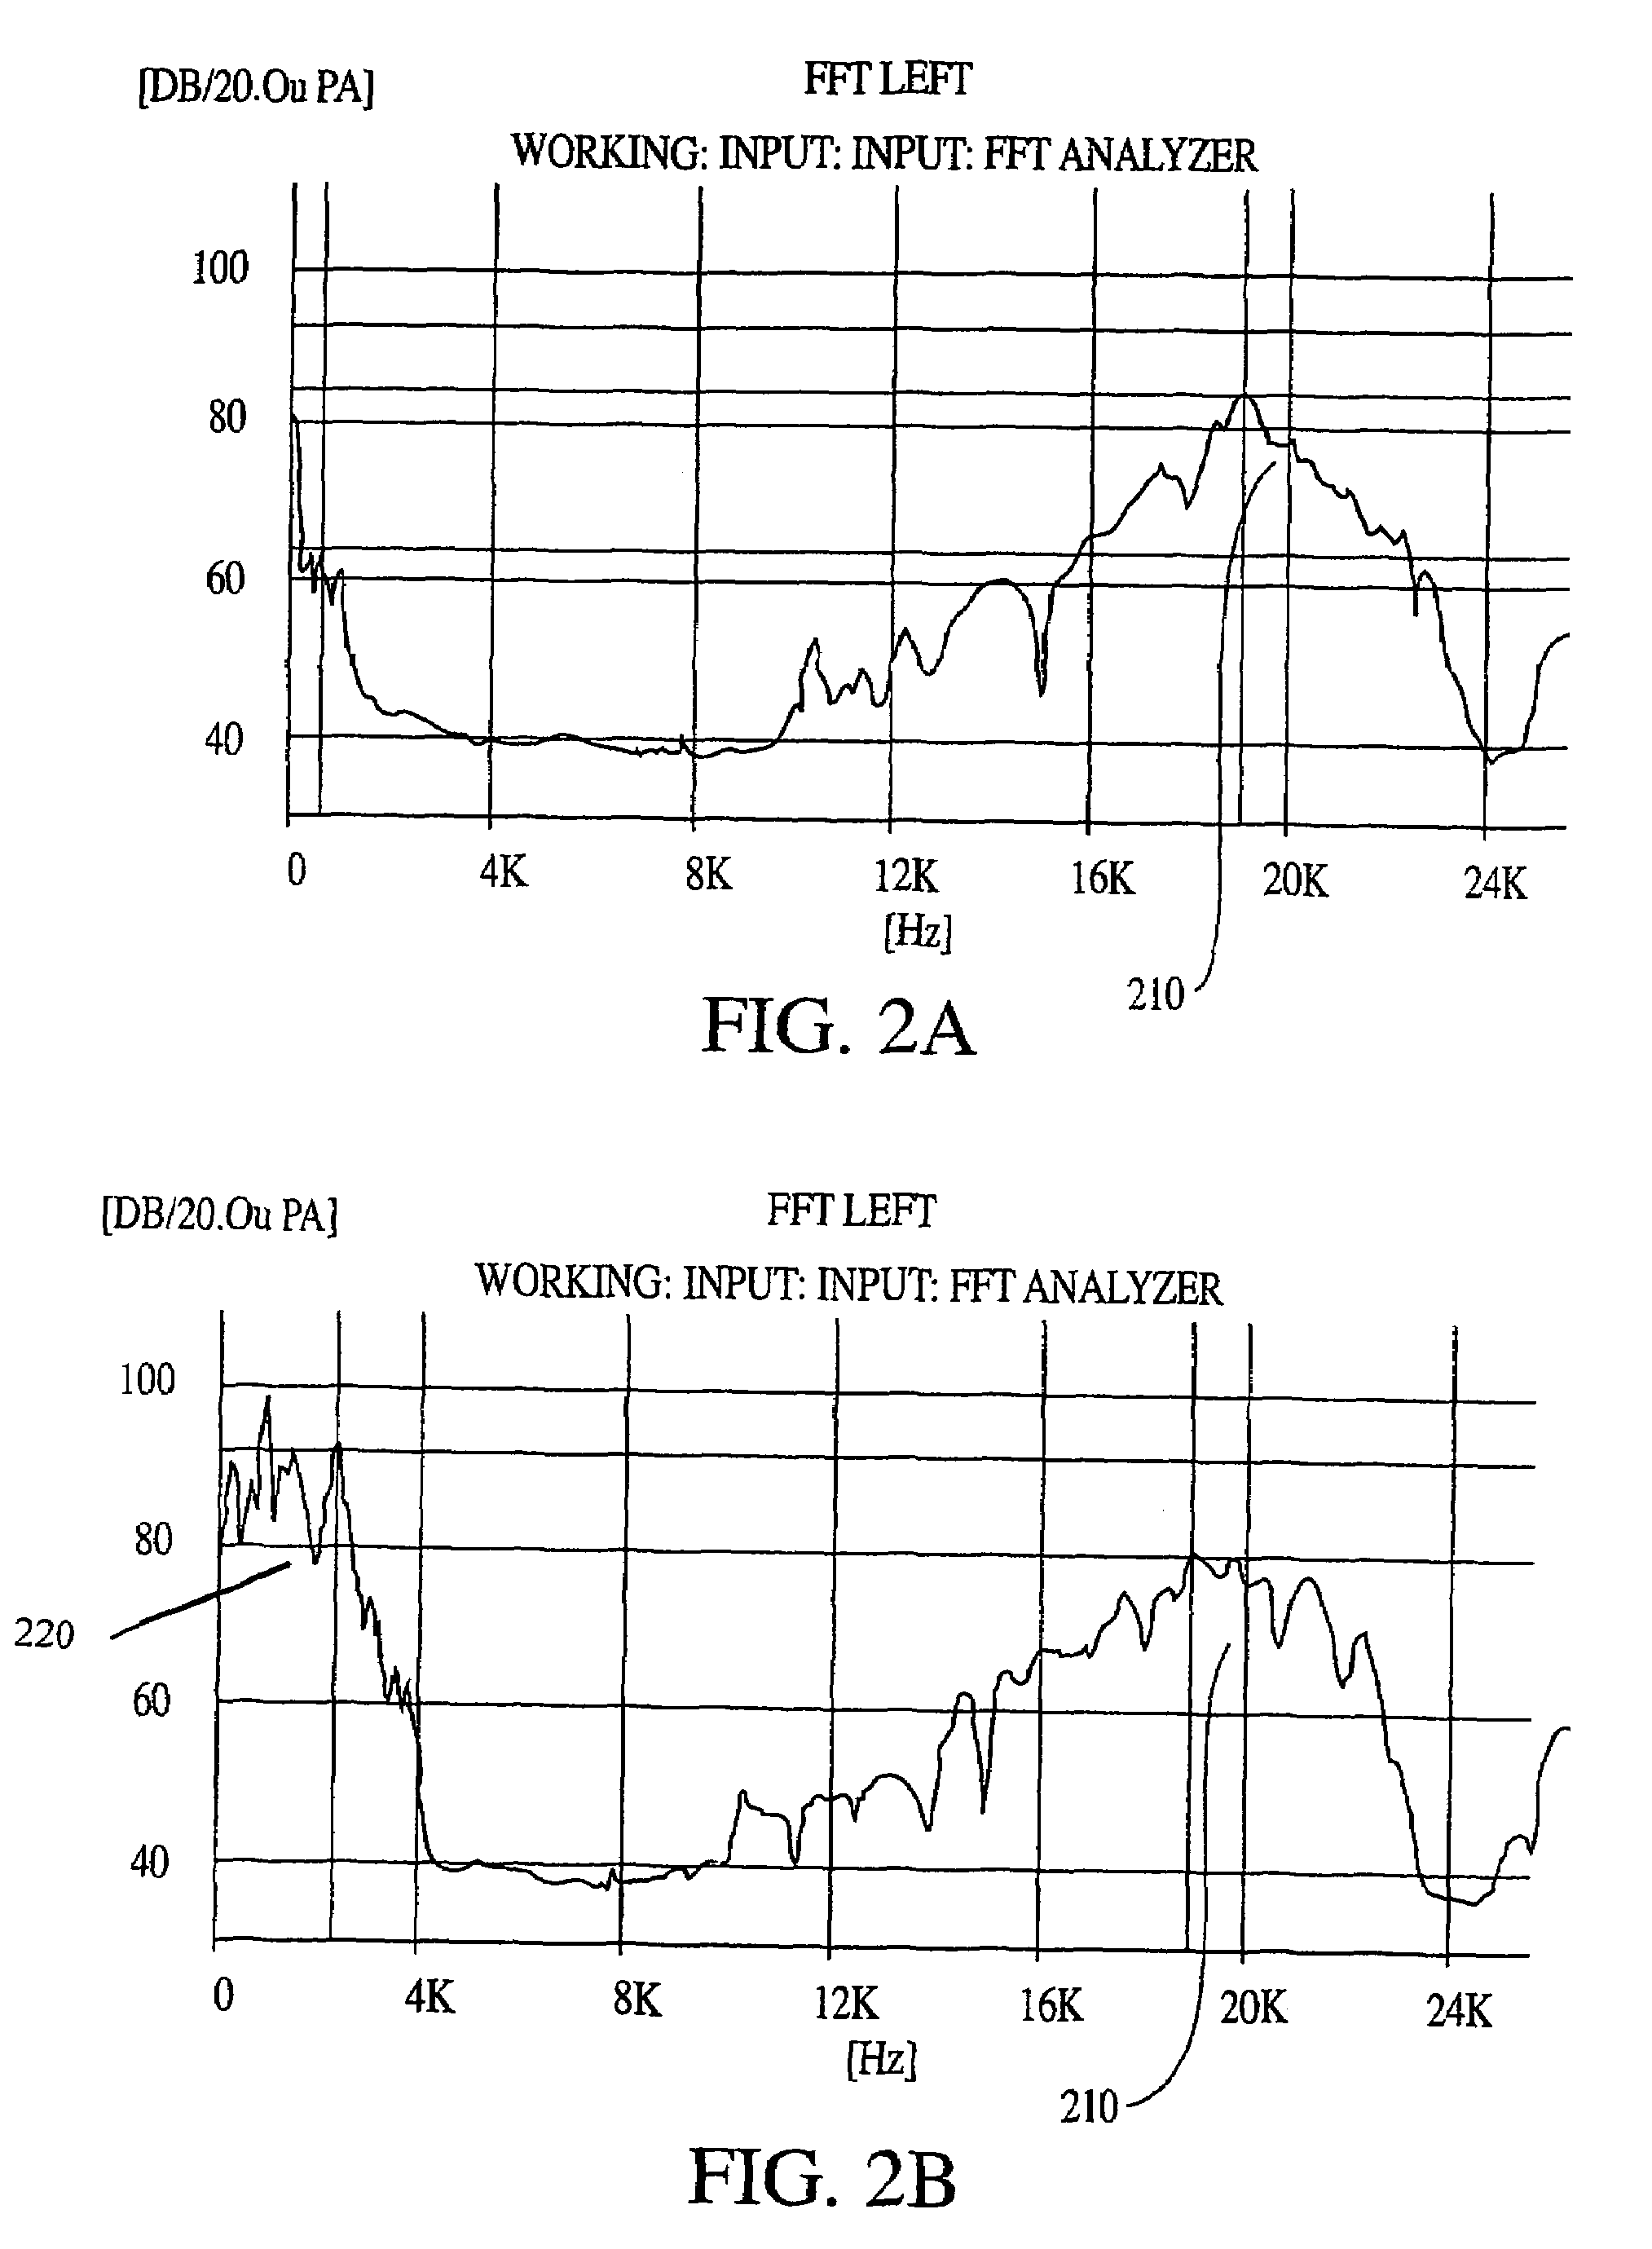 Acoustic coupler for skin contact hearing enhancement devices